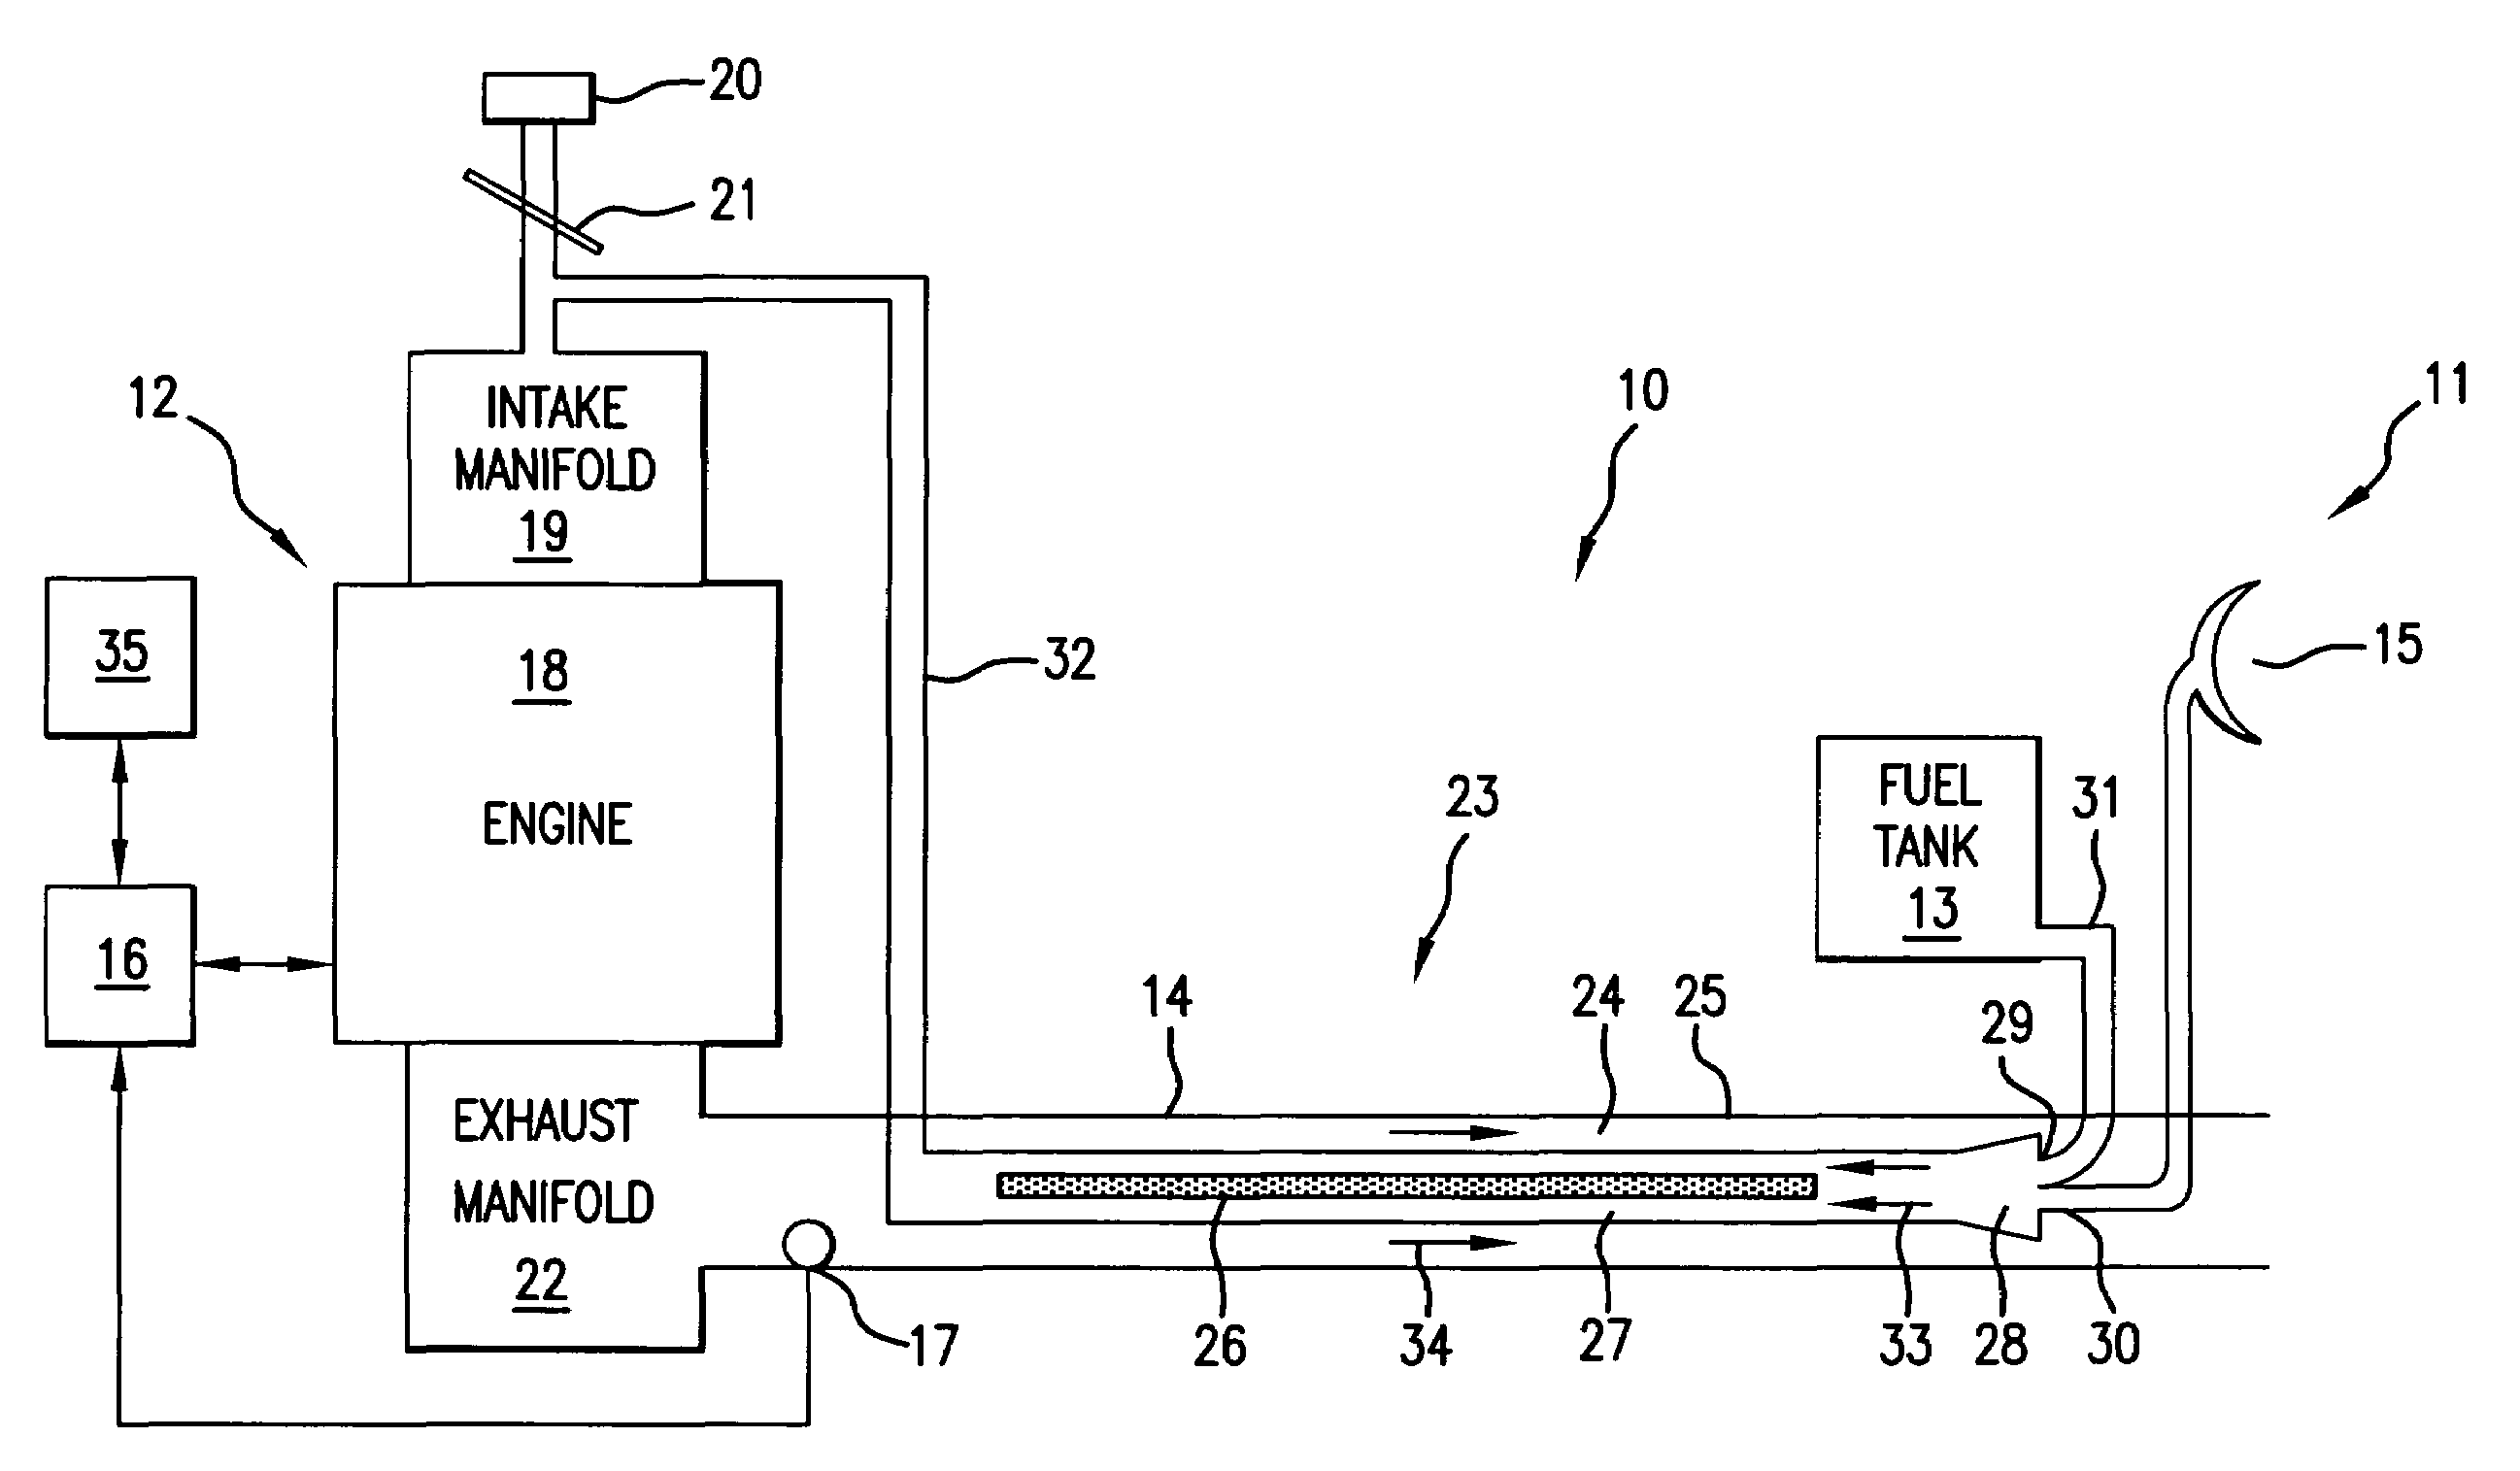 Pre-ignition fuel treatment system